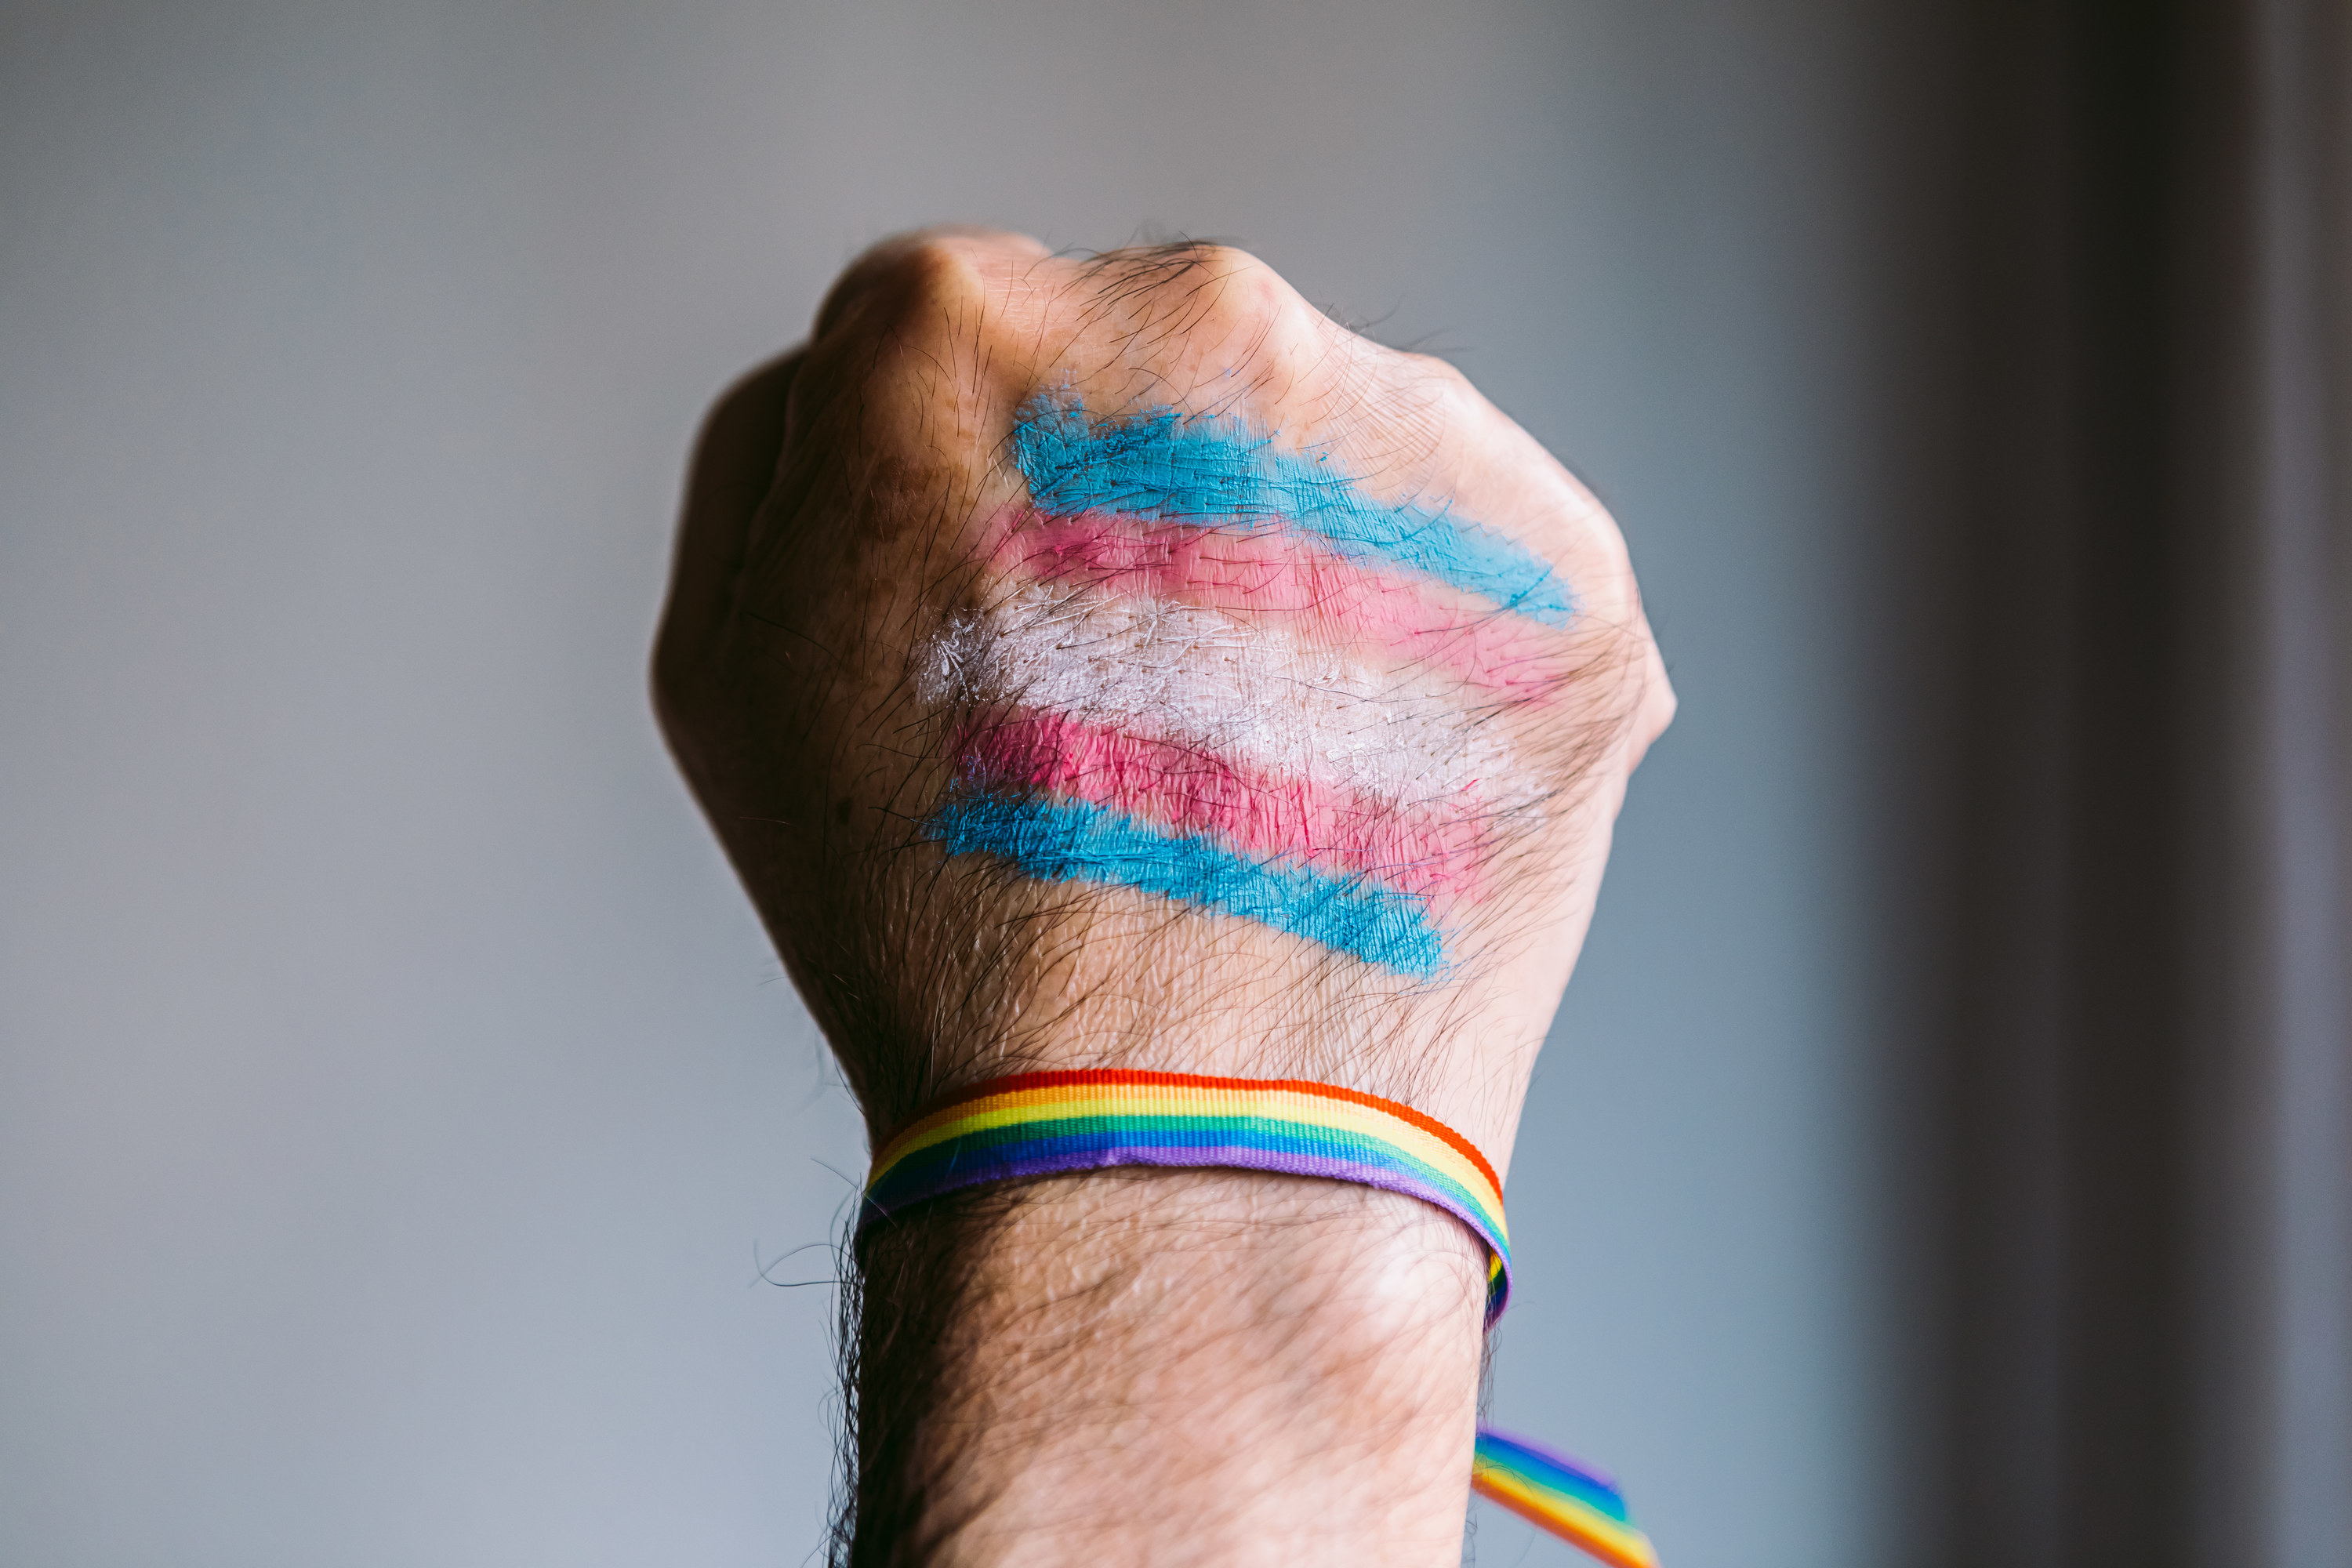 Clenched fist with a painted trans flag and an LGTBIQ flag bracelet